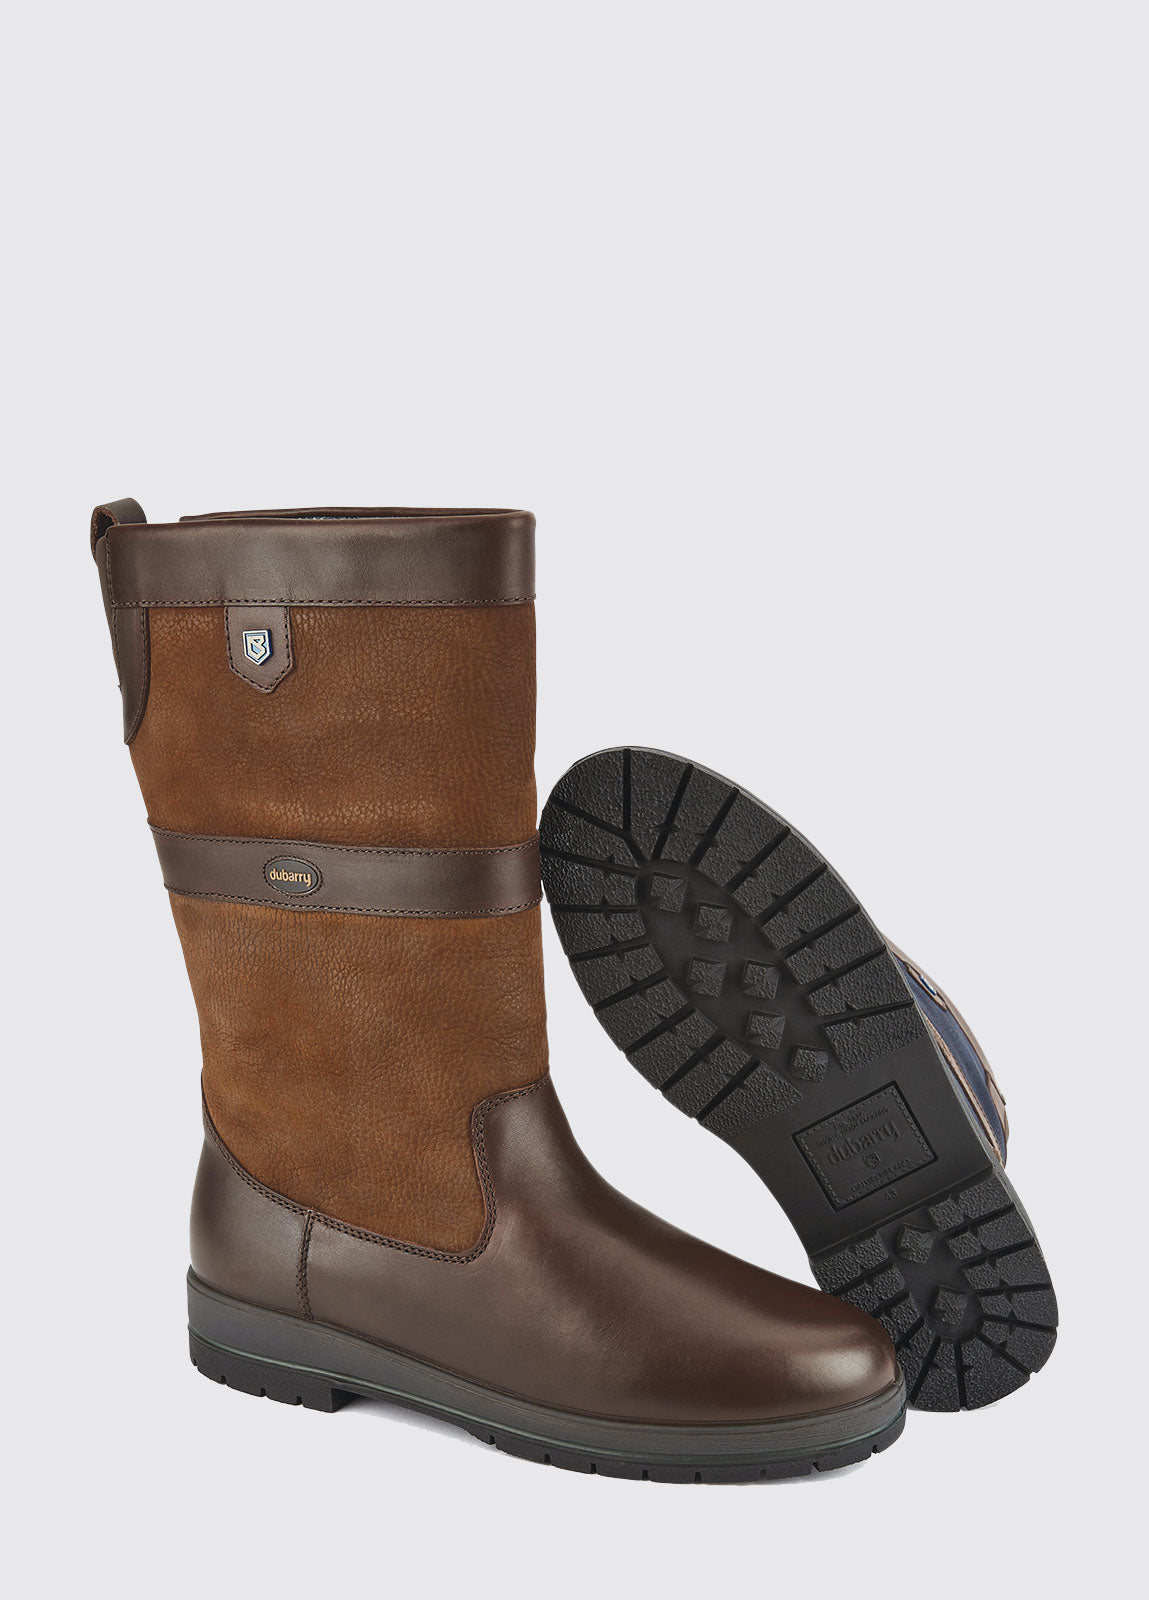 Kildare ExtraFit Country Boot - Walnut